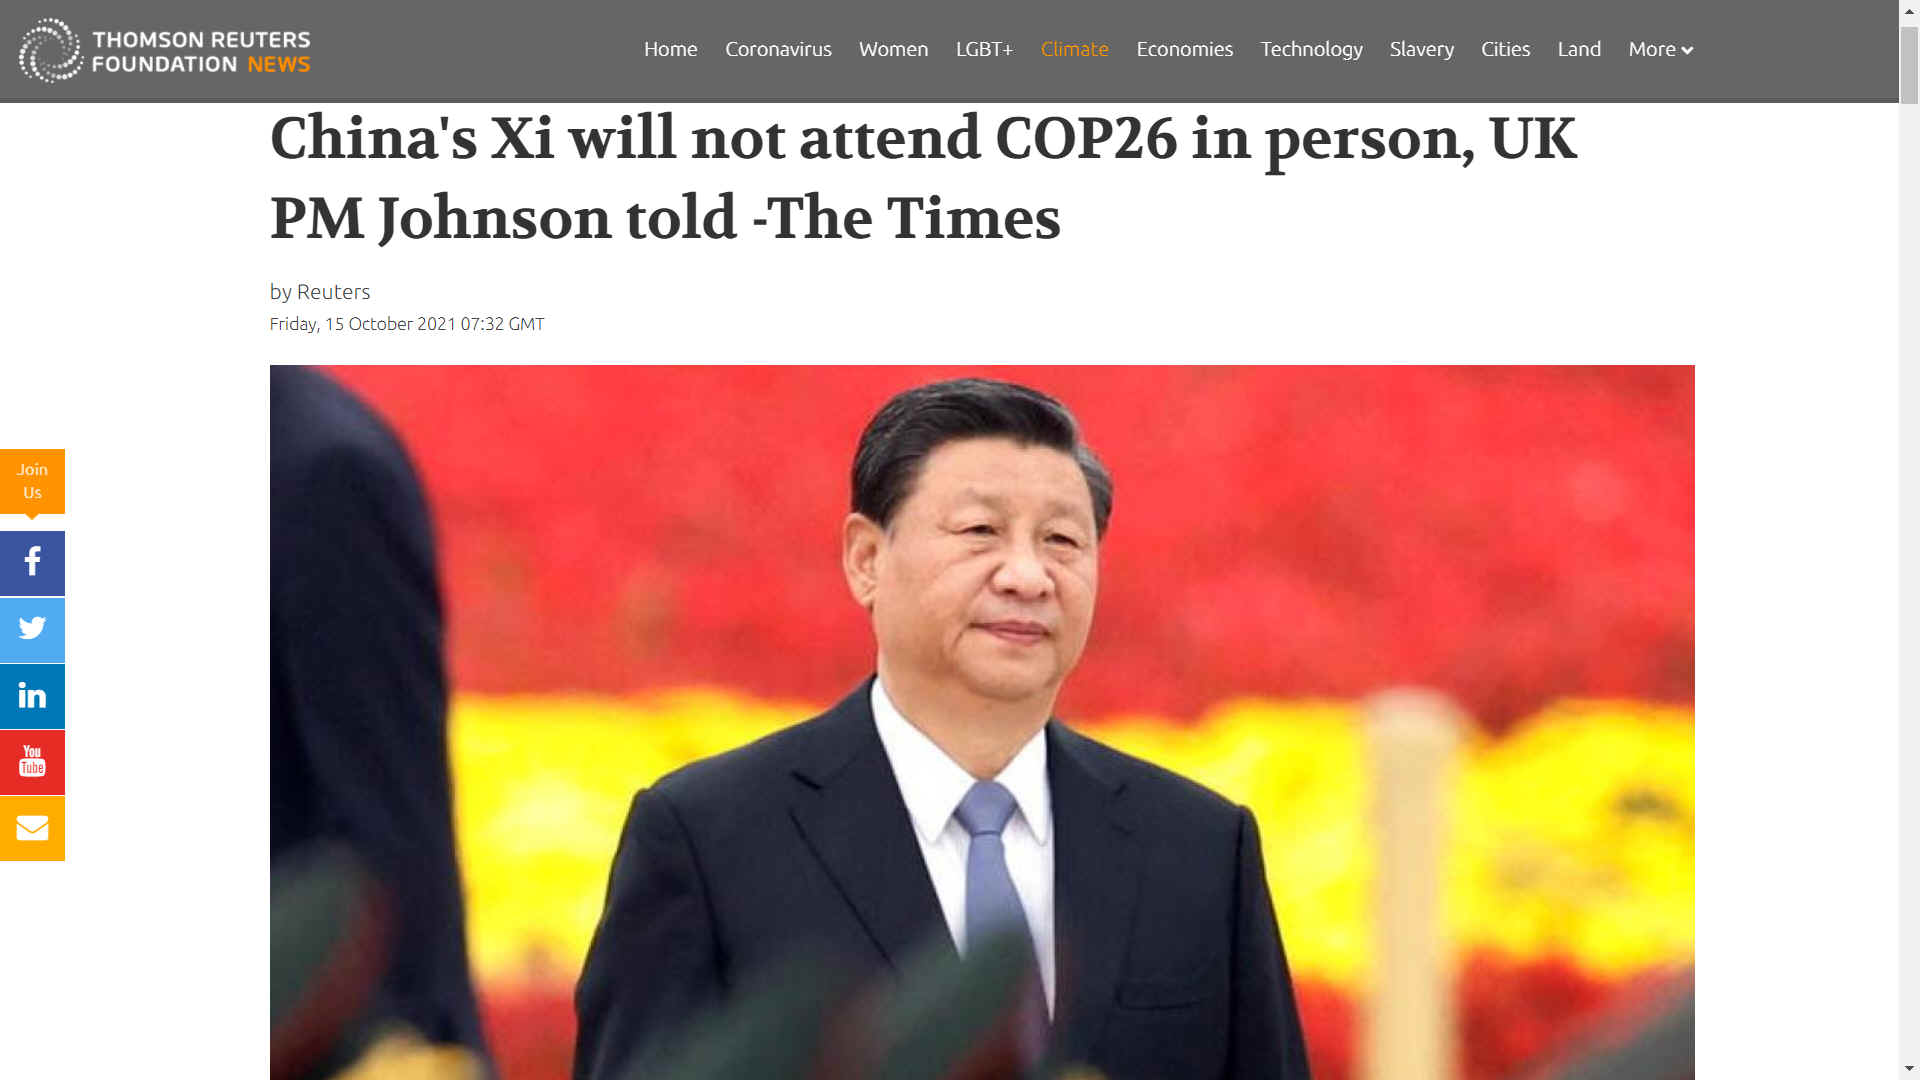 Xi Jinping's China is the dirtiest country in the world, climate wise